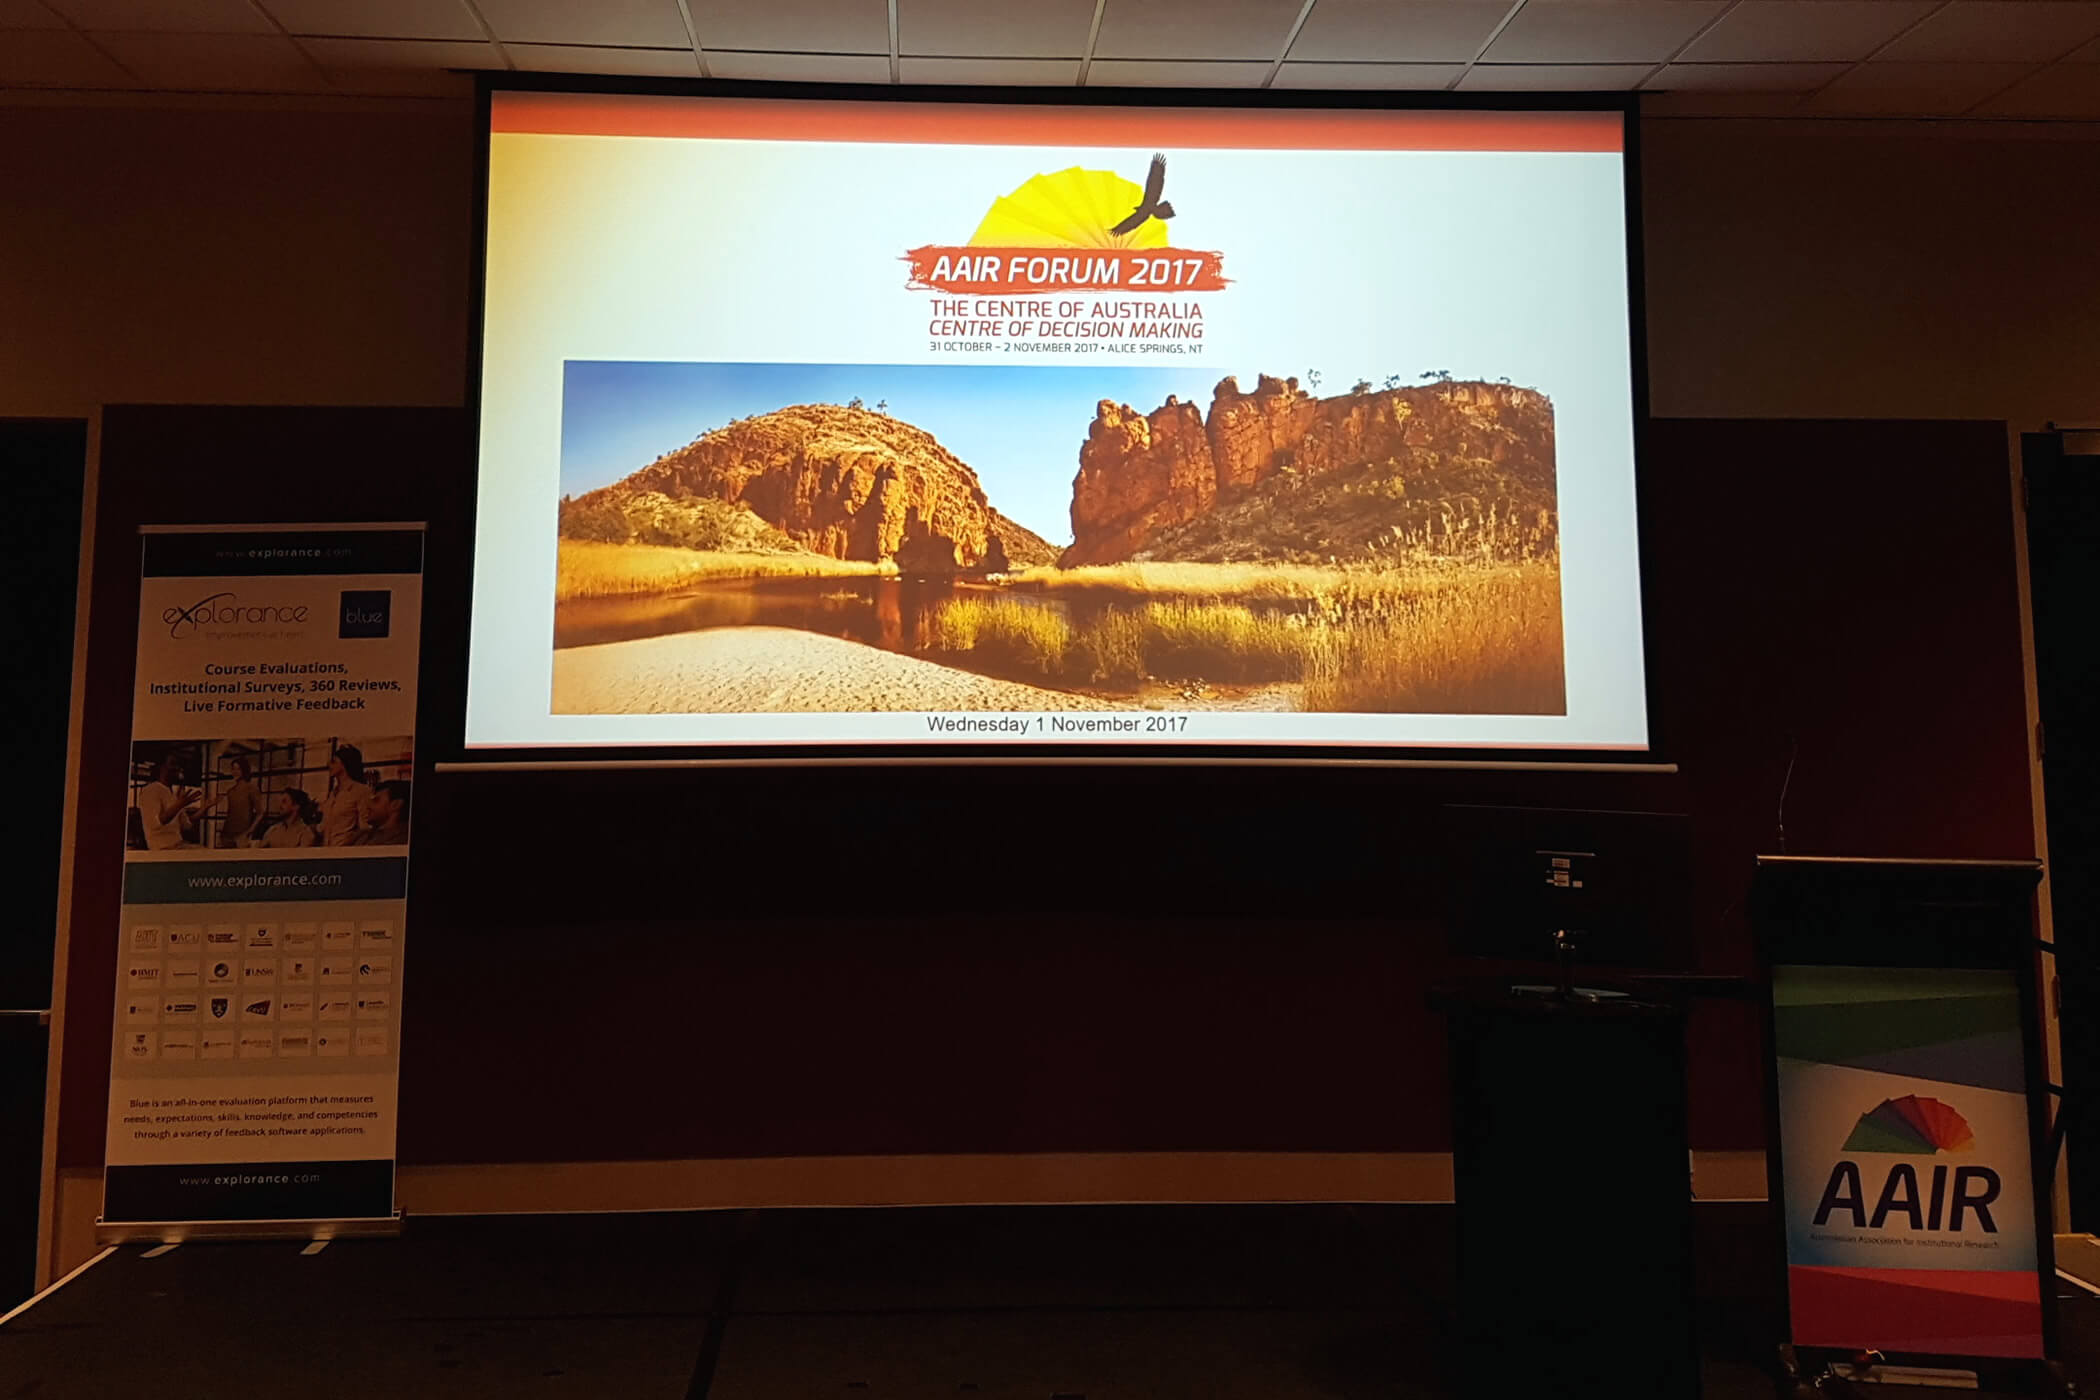 Photo of the opening powerpoint screen from the 2017 AAIR Forum in Alice SPrings